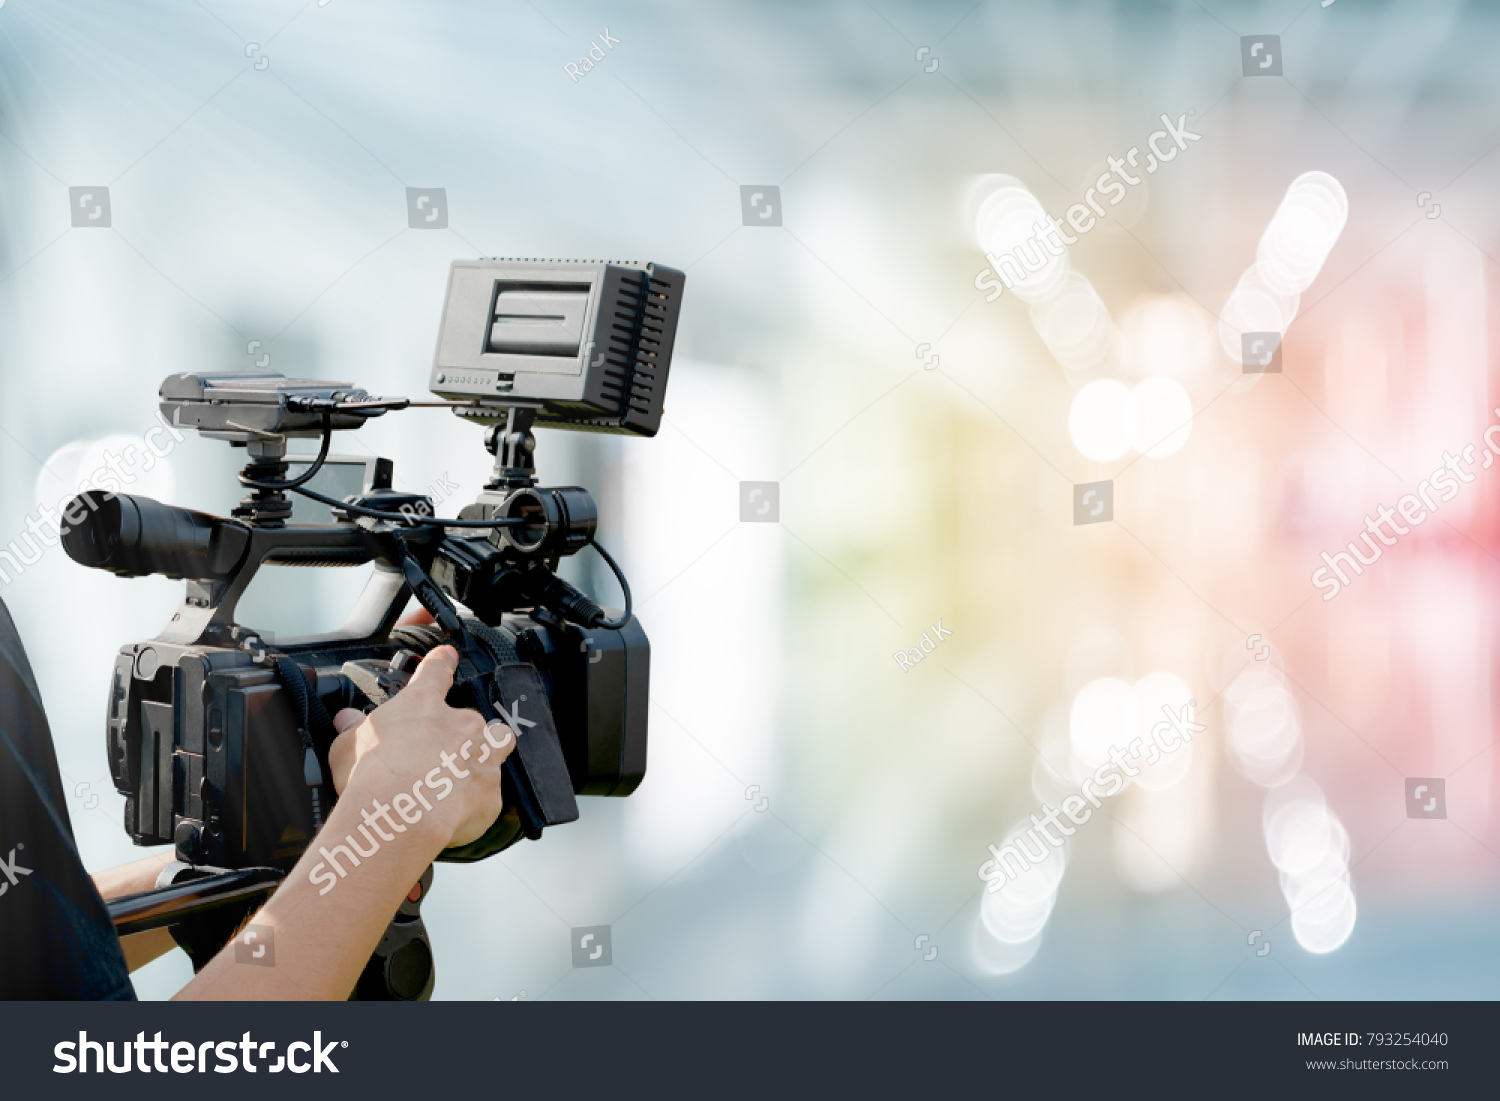 Video camera with abstract blurred background, idea concept for video professional business. #793254040